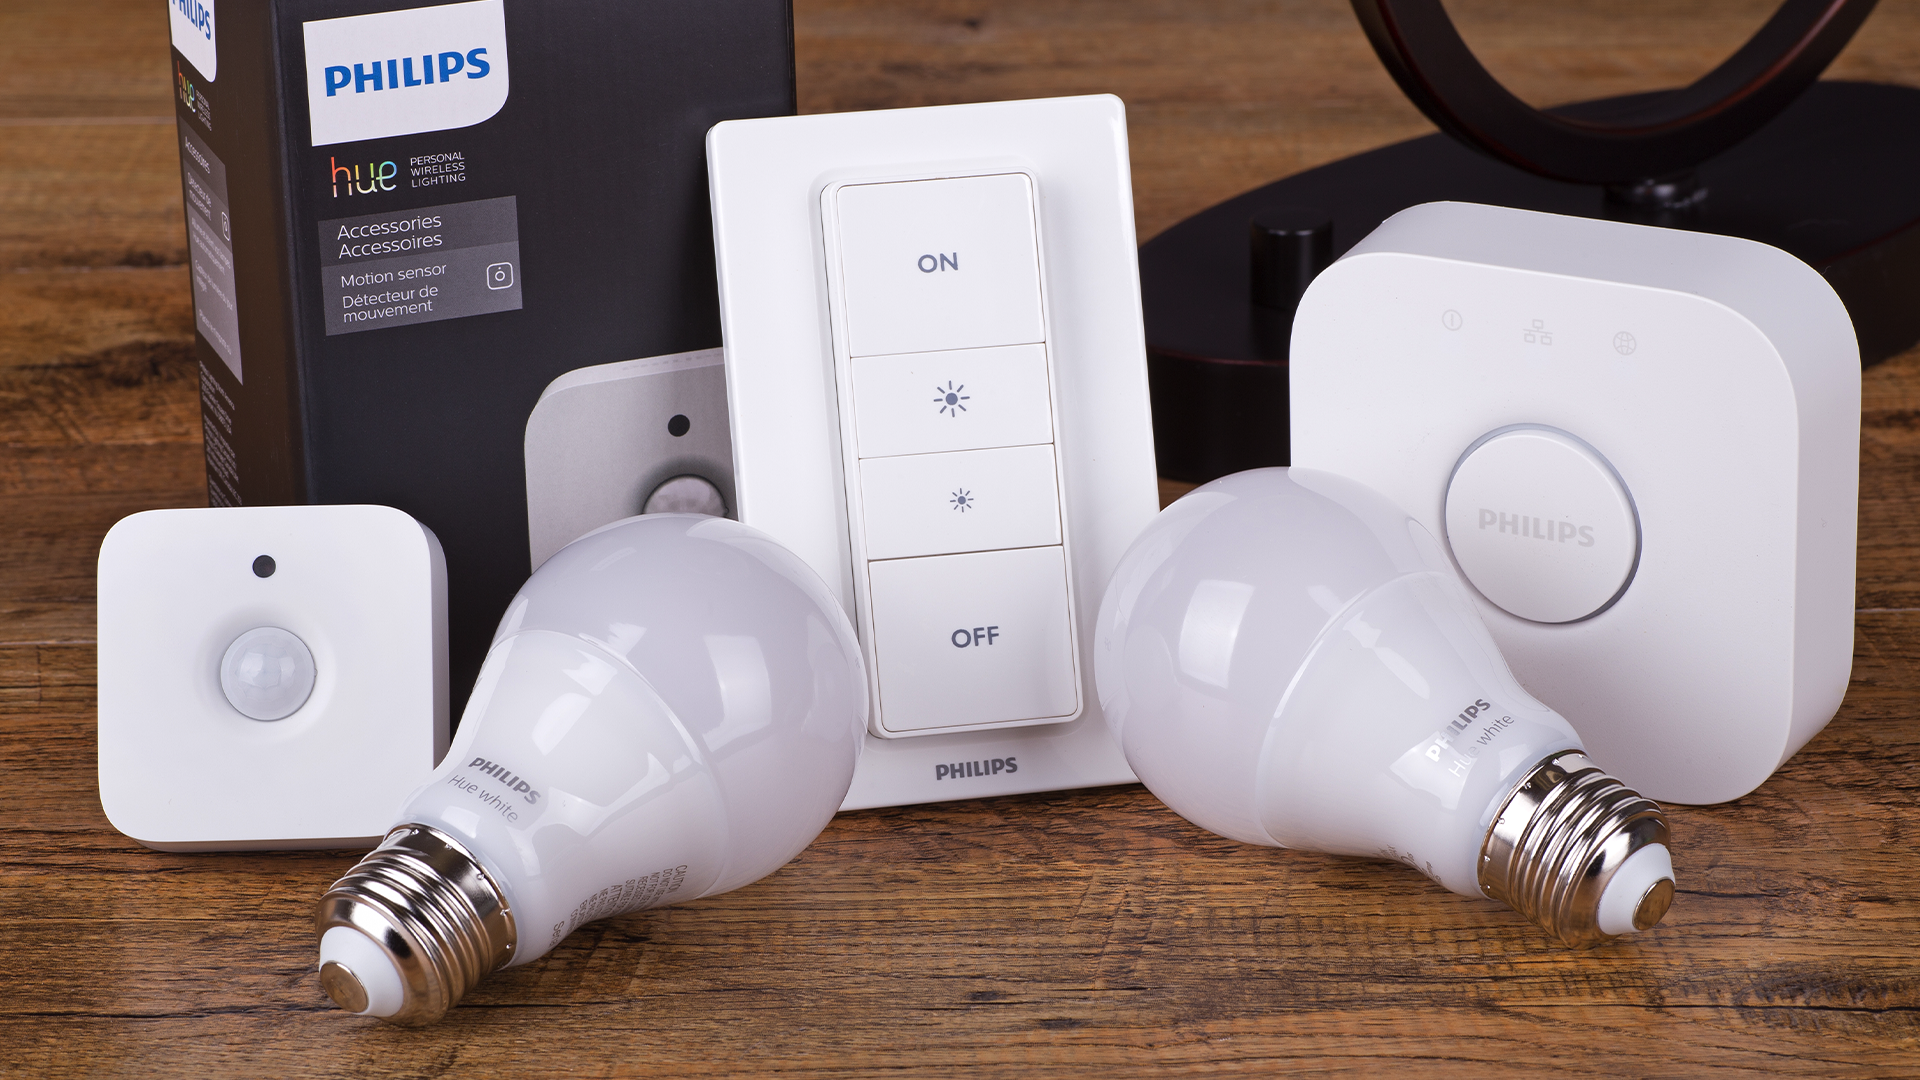 Why Are Philips Hue Smart Lights so Expensive?